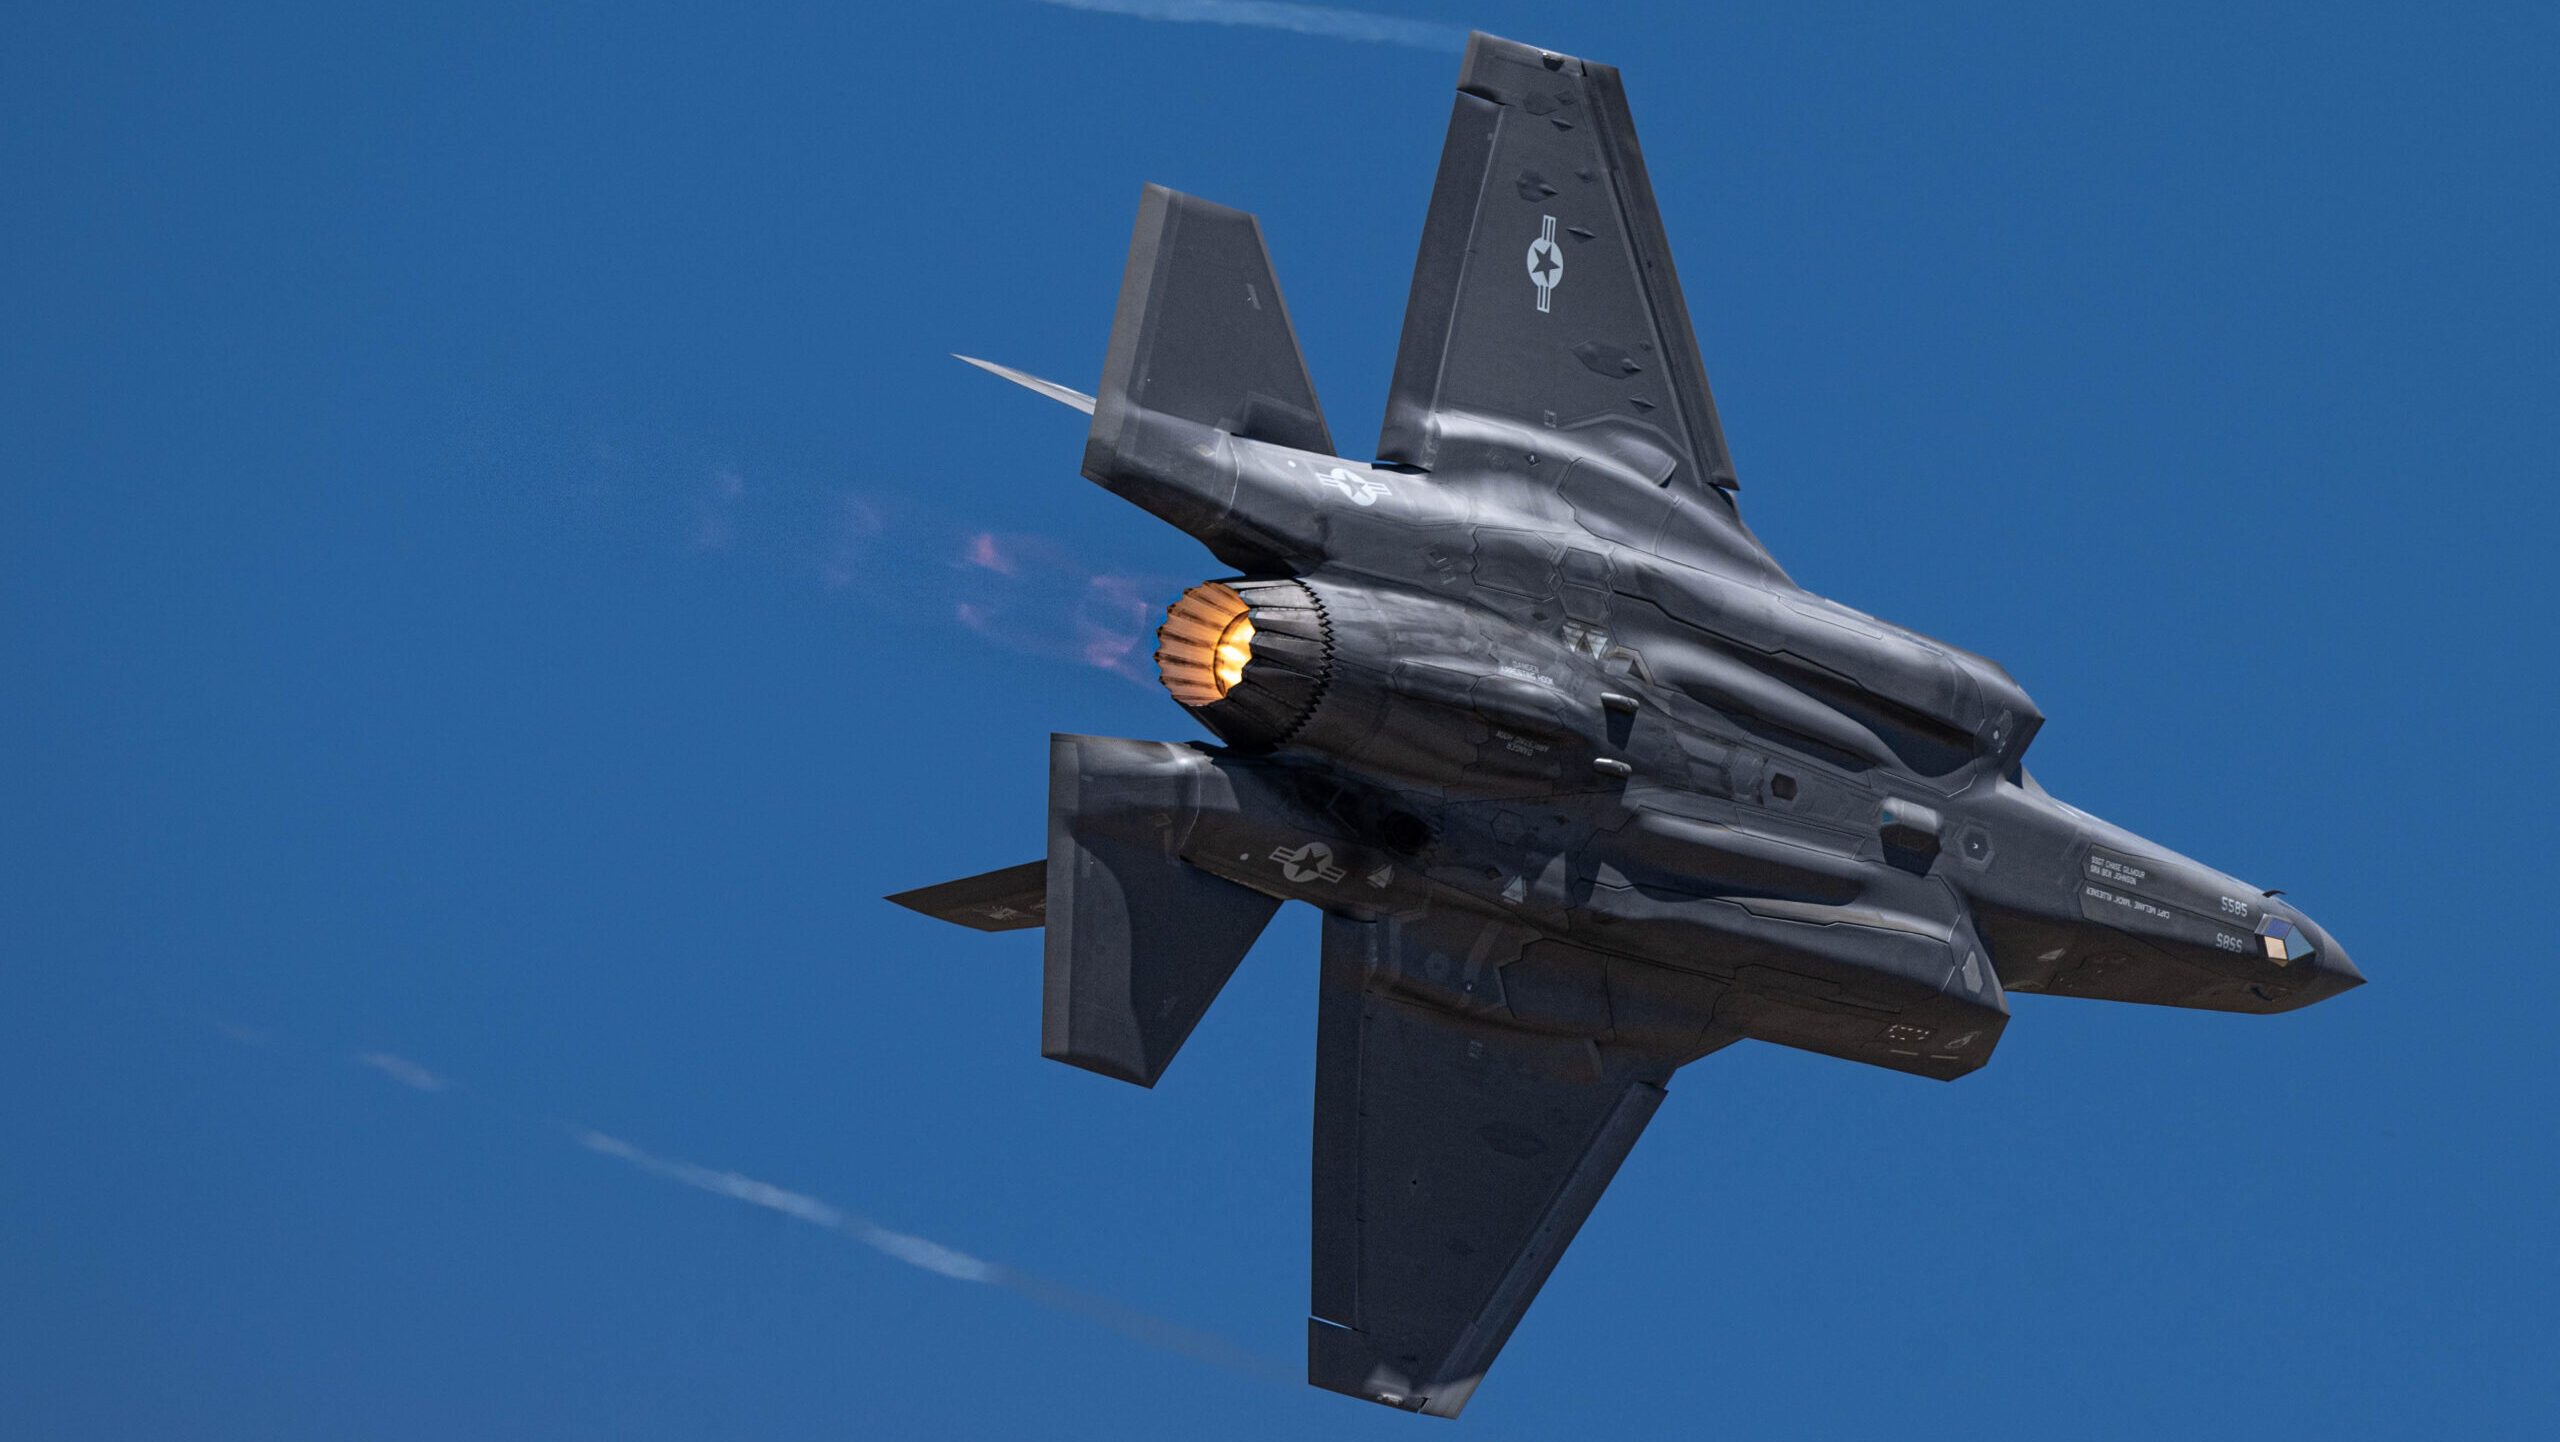 EXCLUSIVE: Pentagon launching competition to replace F-35 cooling system